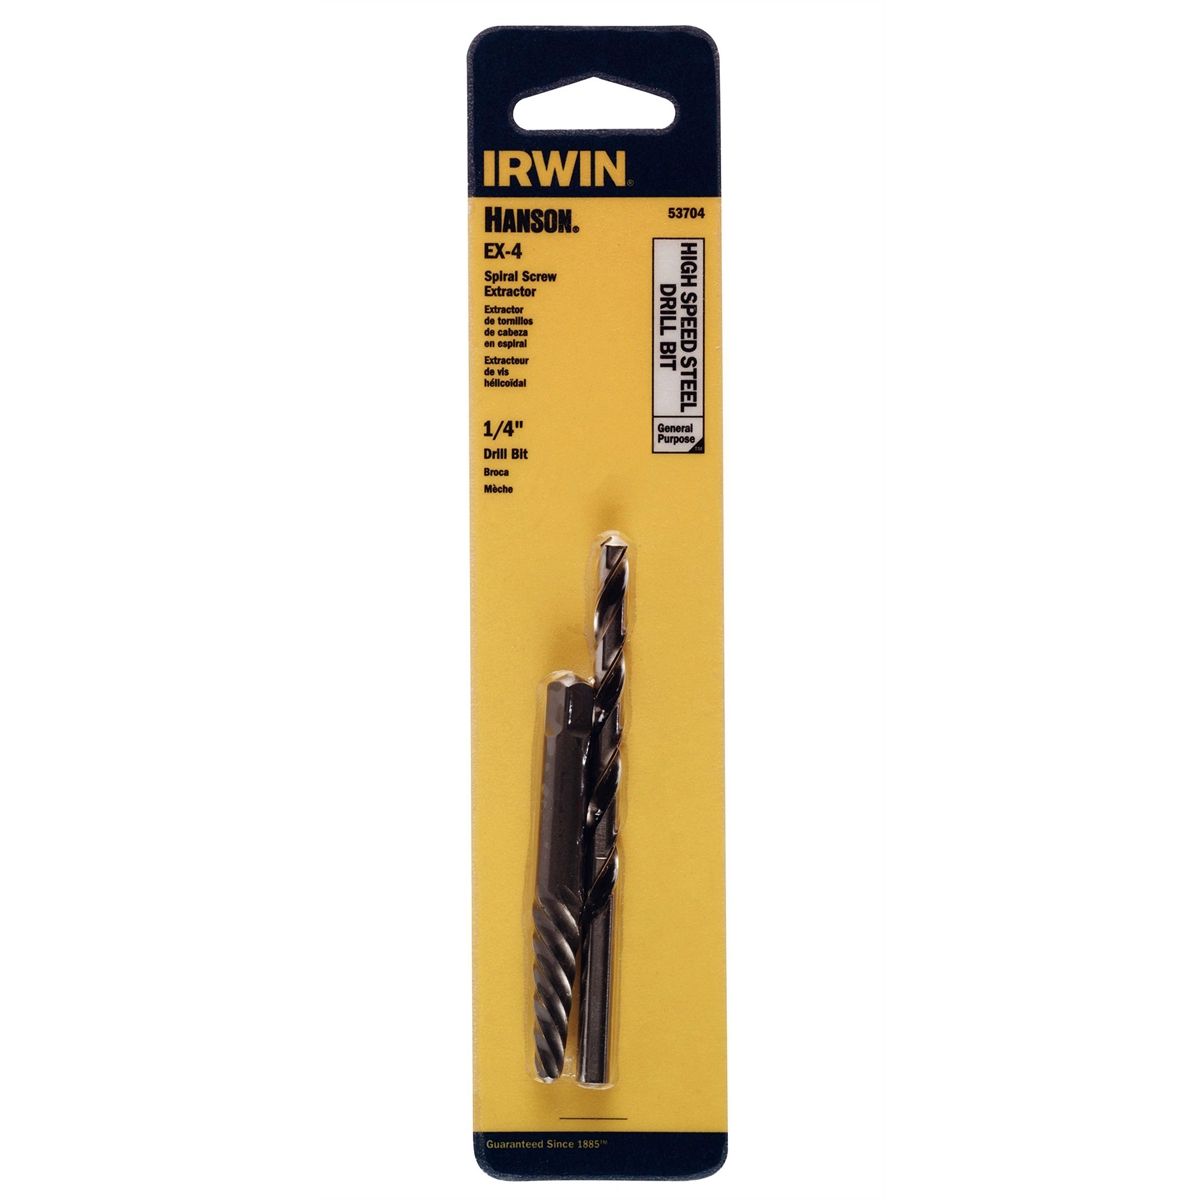 Spiral & Drill Bit Combo Pack - Ex-4 + 1/4In - Carded